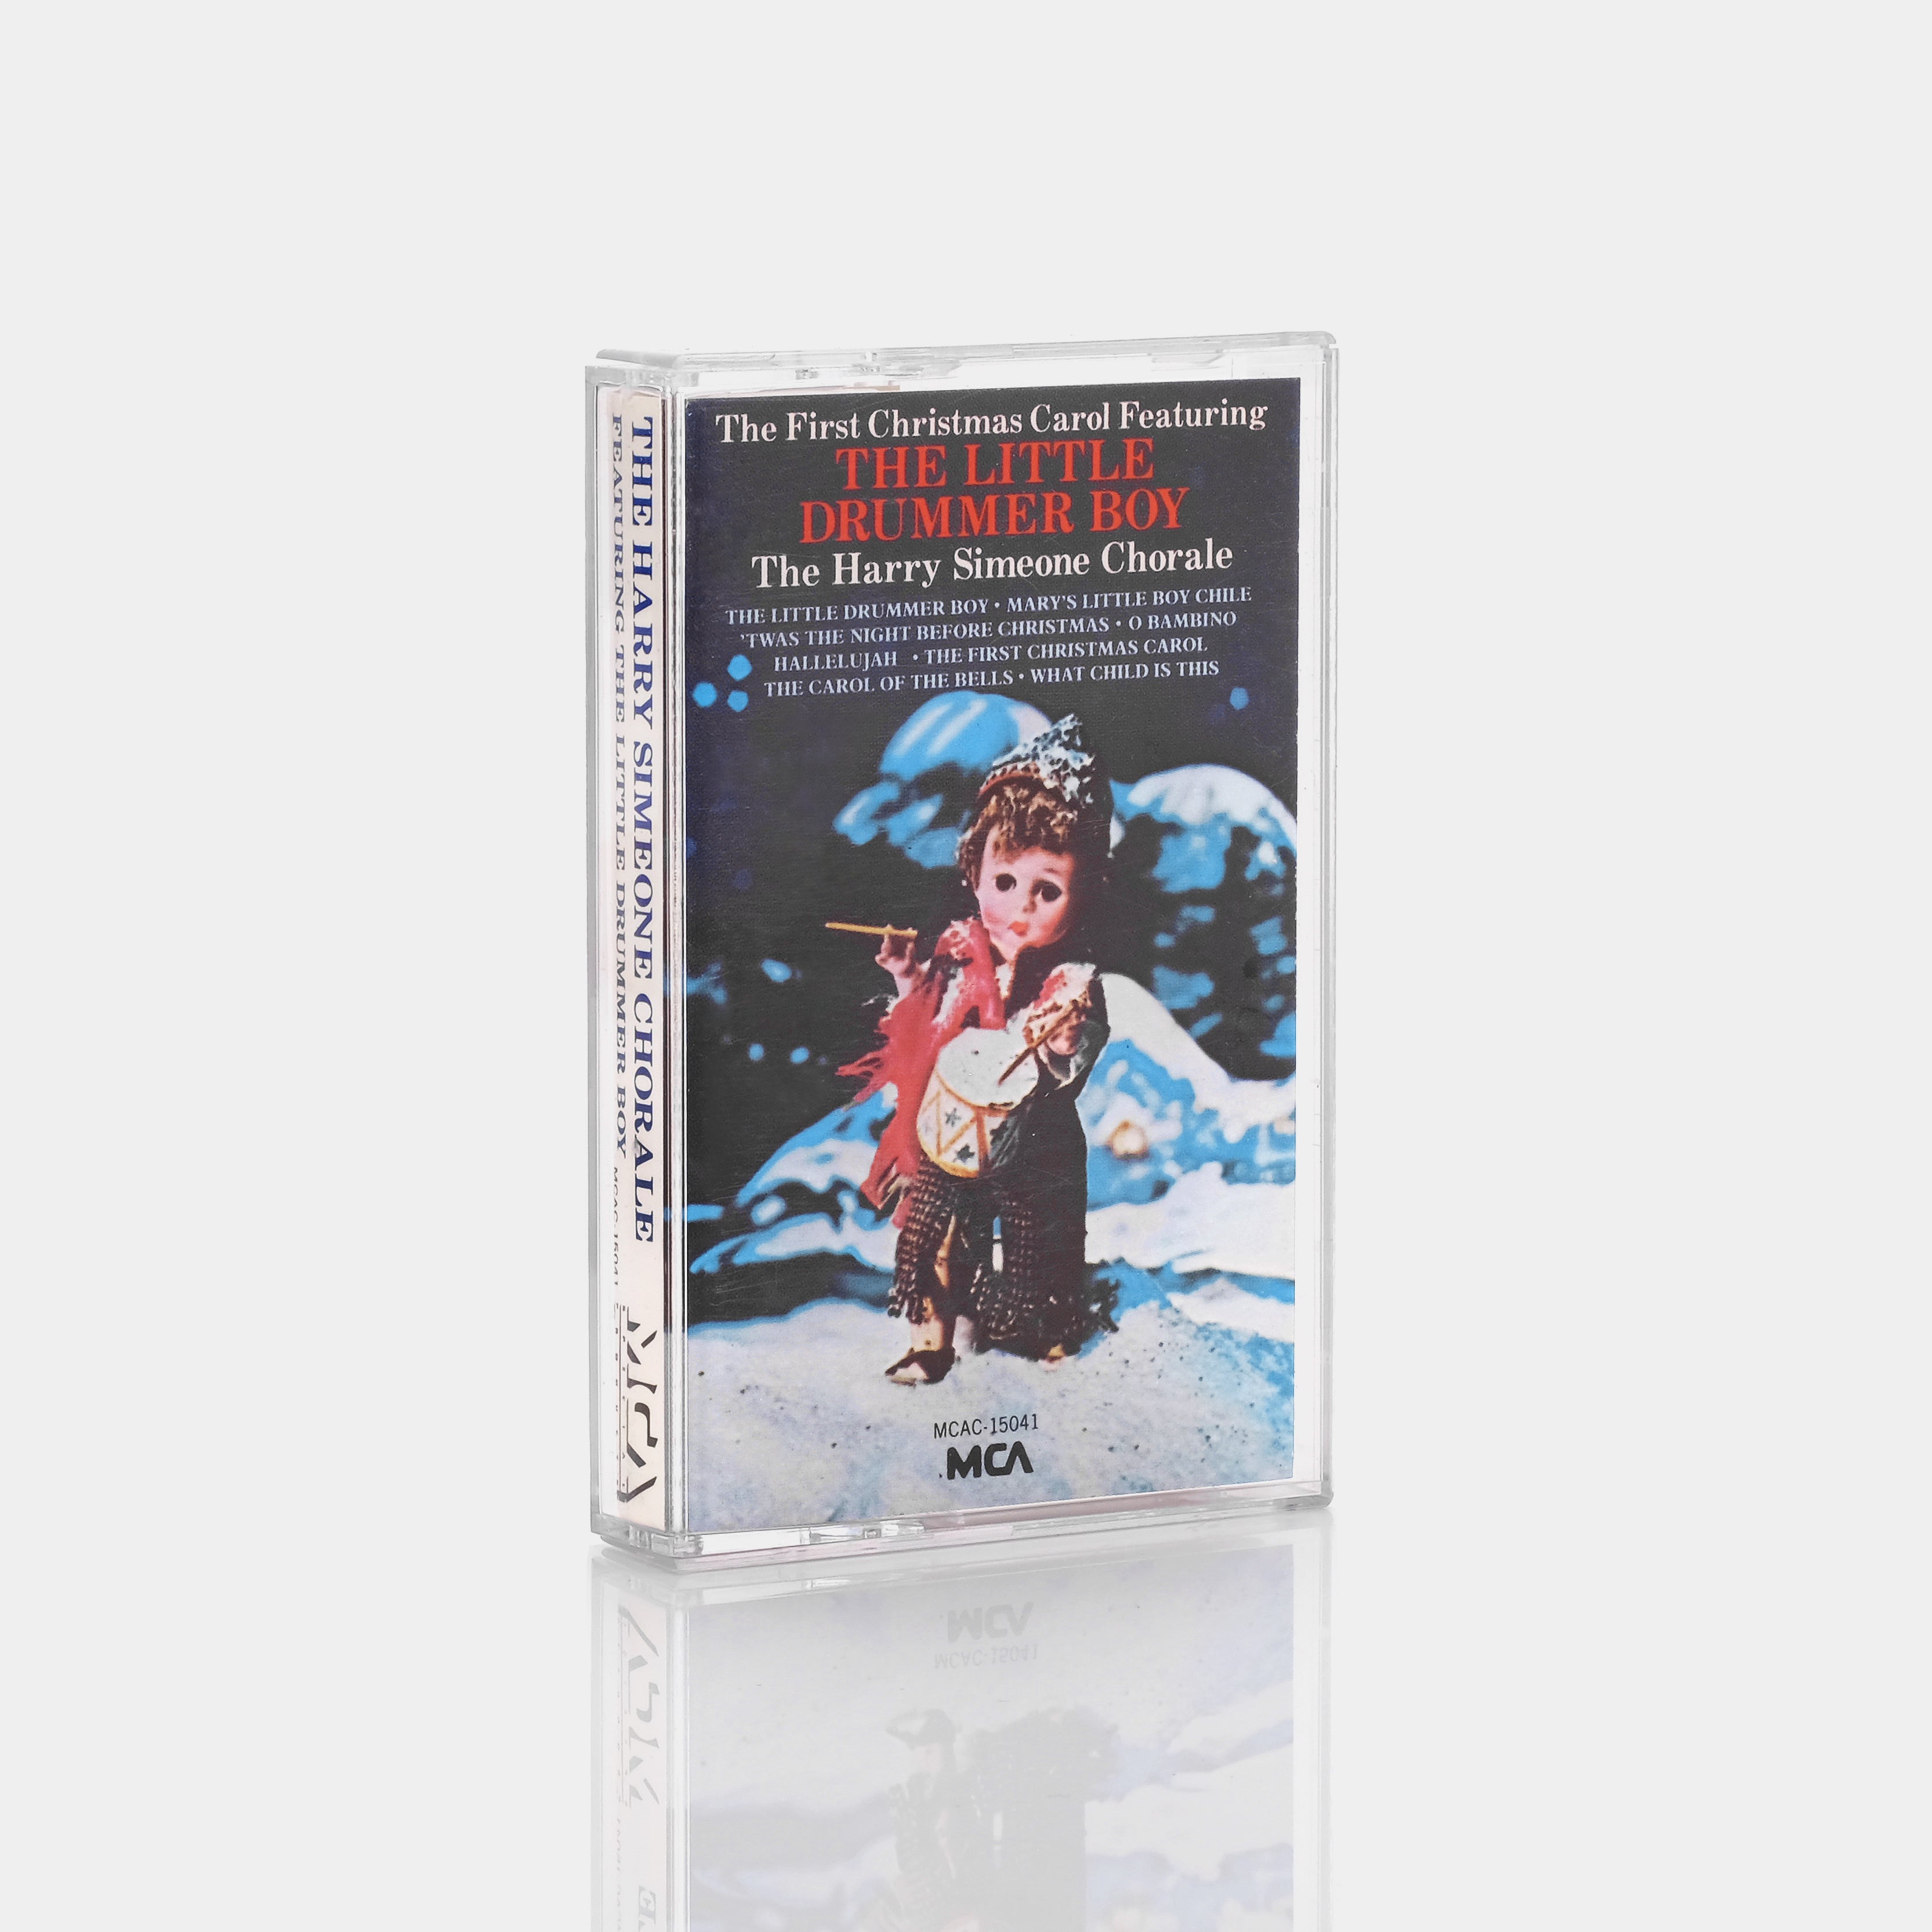 The Harry Simeone Chorale - The First Christmas Carol Cassette Tape